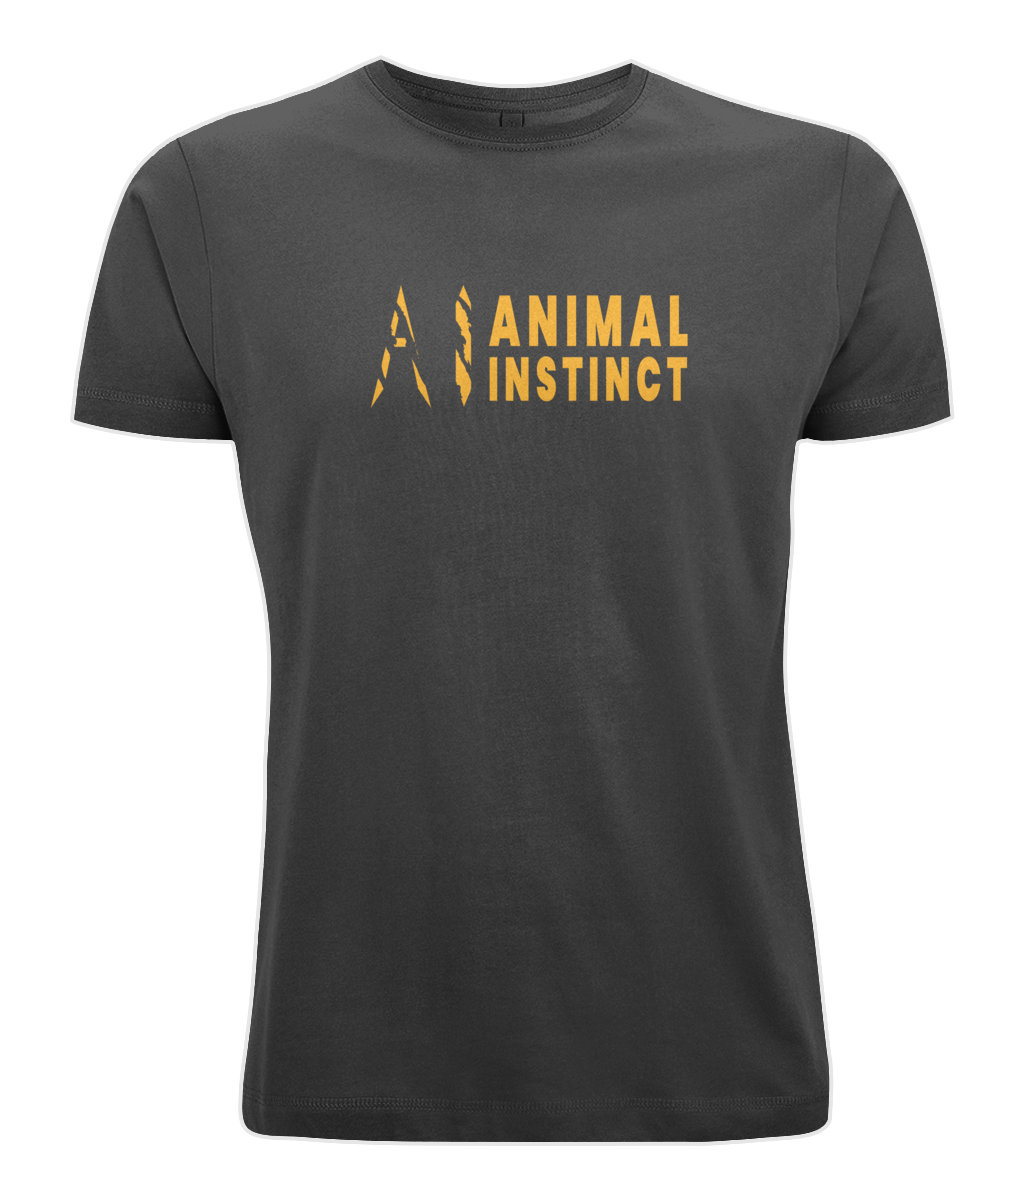 Mens charcoal Graphic Animal Instinct T-Shirt with Premium gold AI logo and Animal Instinct written in premium gold Across the middle of the chest